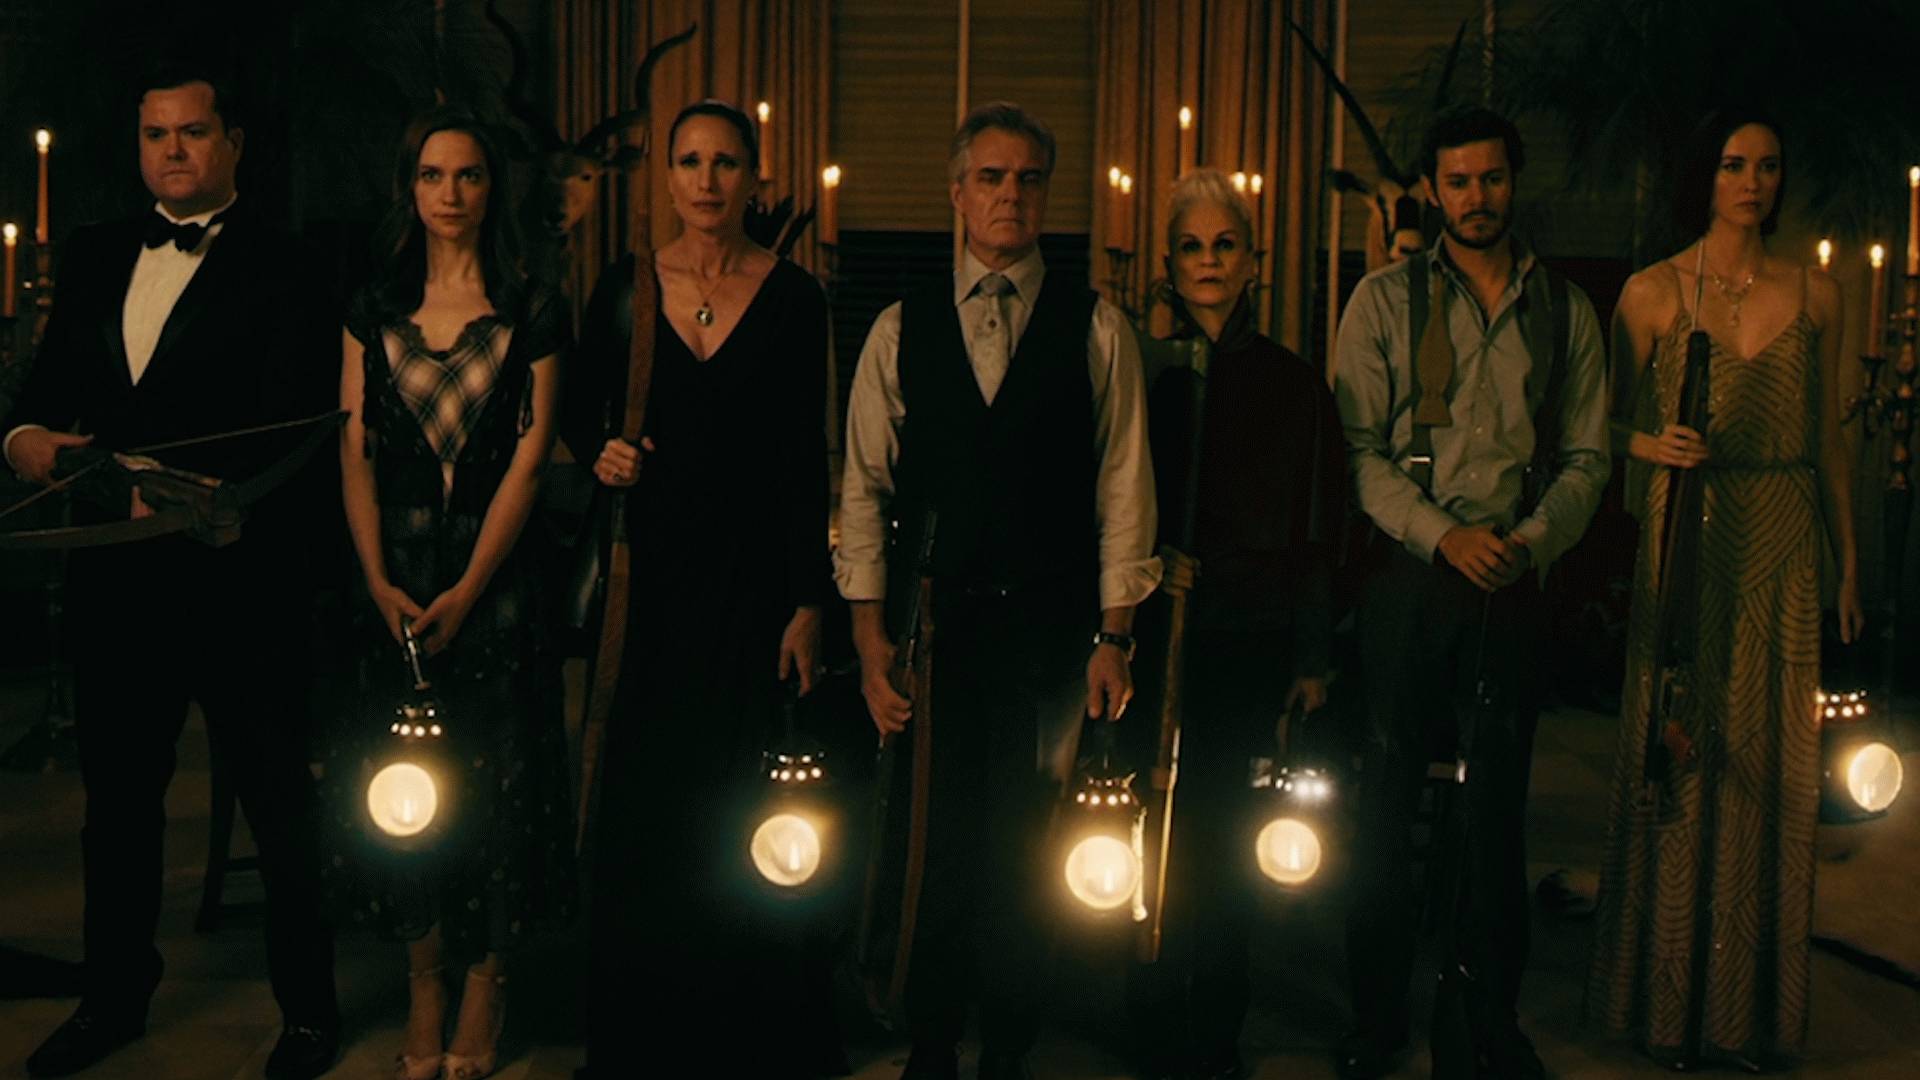 The pursuing family - (l to r) Kristian Bruun, Elyse Levesque, Andie McDowell, Henry Czerny, Nicky Guadagni, Adam Brody and Melanie Scrofano in Ready or Not (2019)